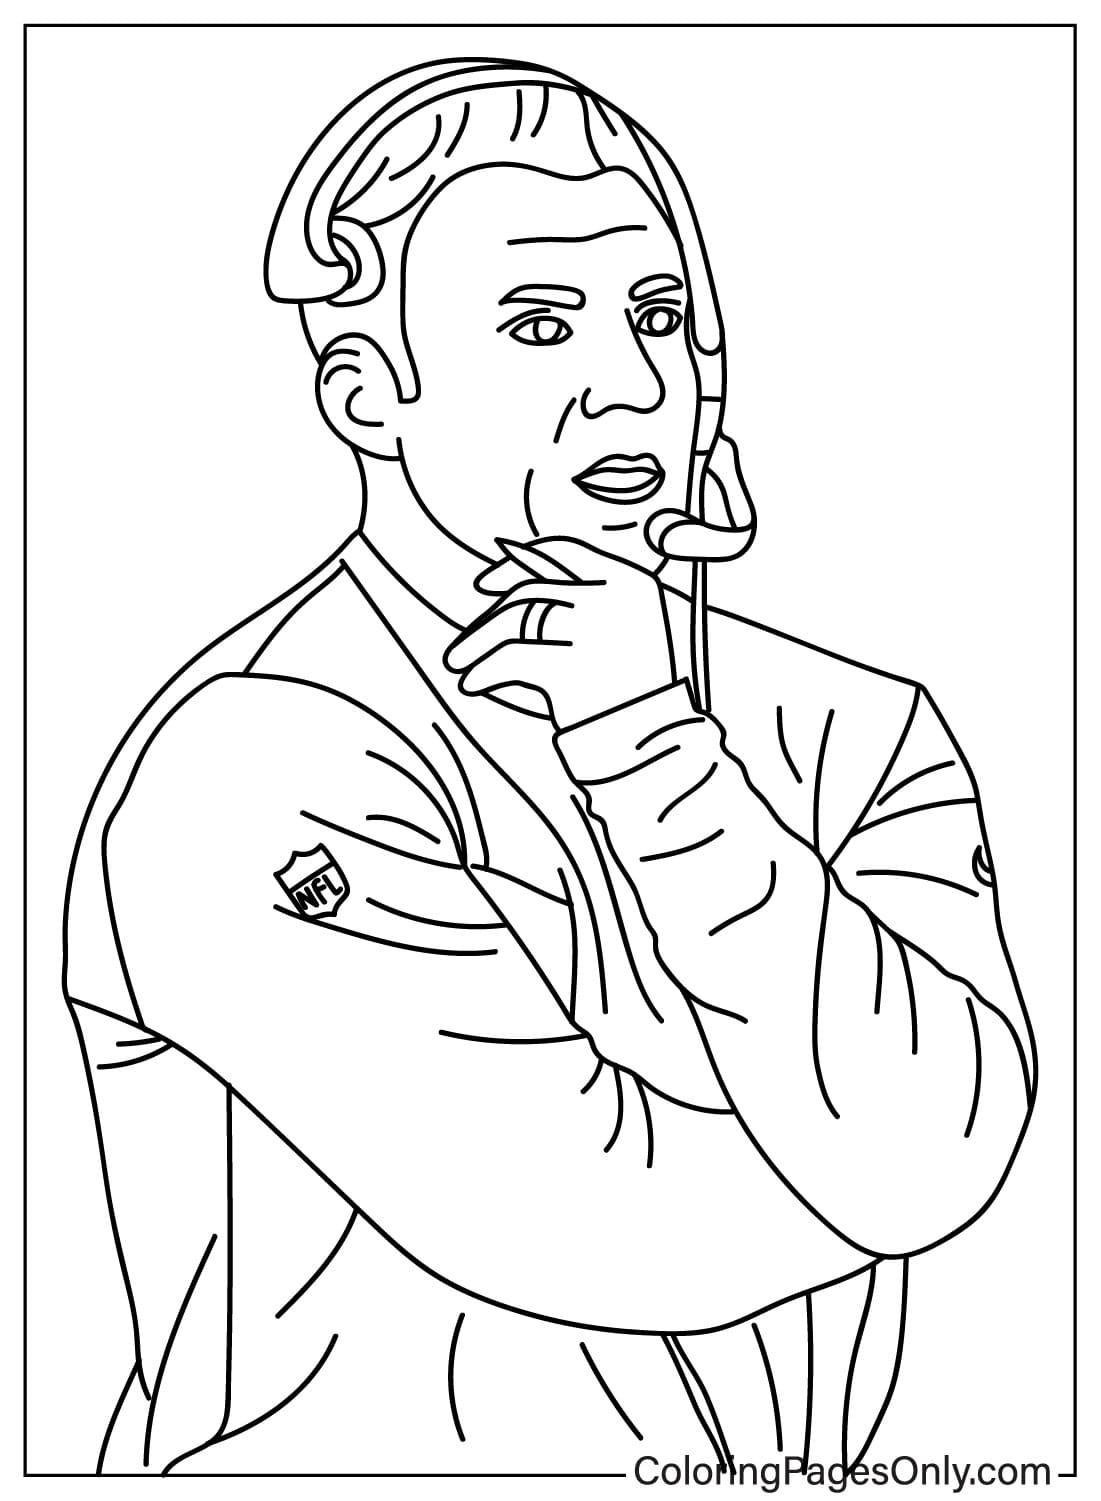 Sean McVay Coloring Page from Los Angeles Rams